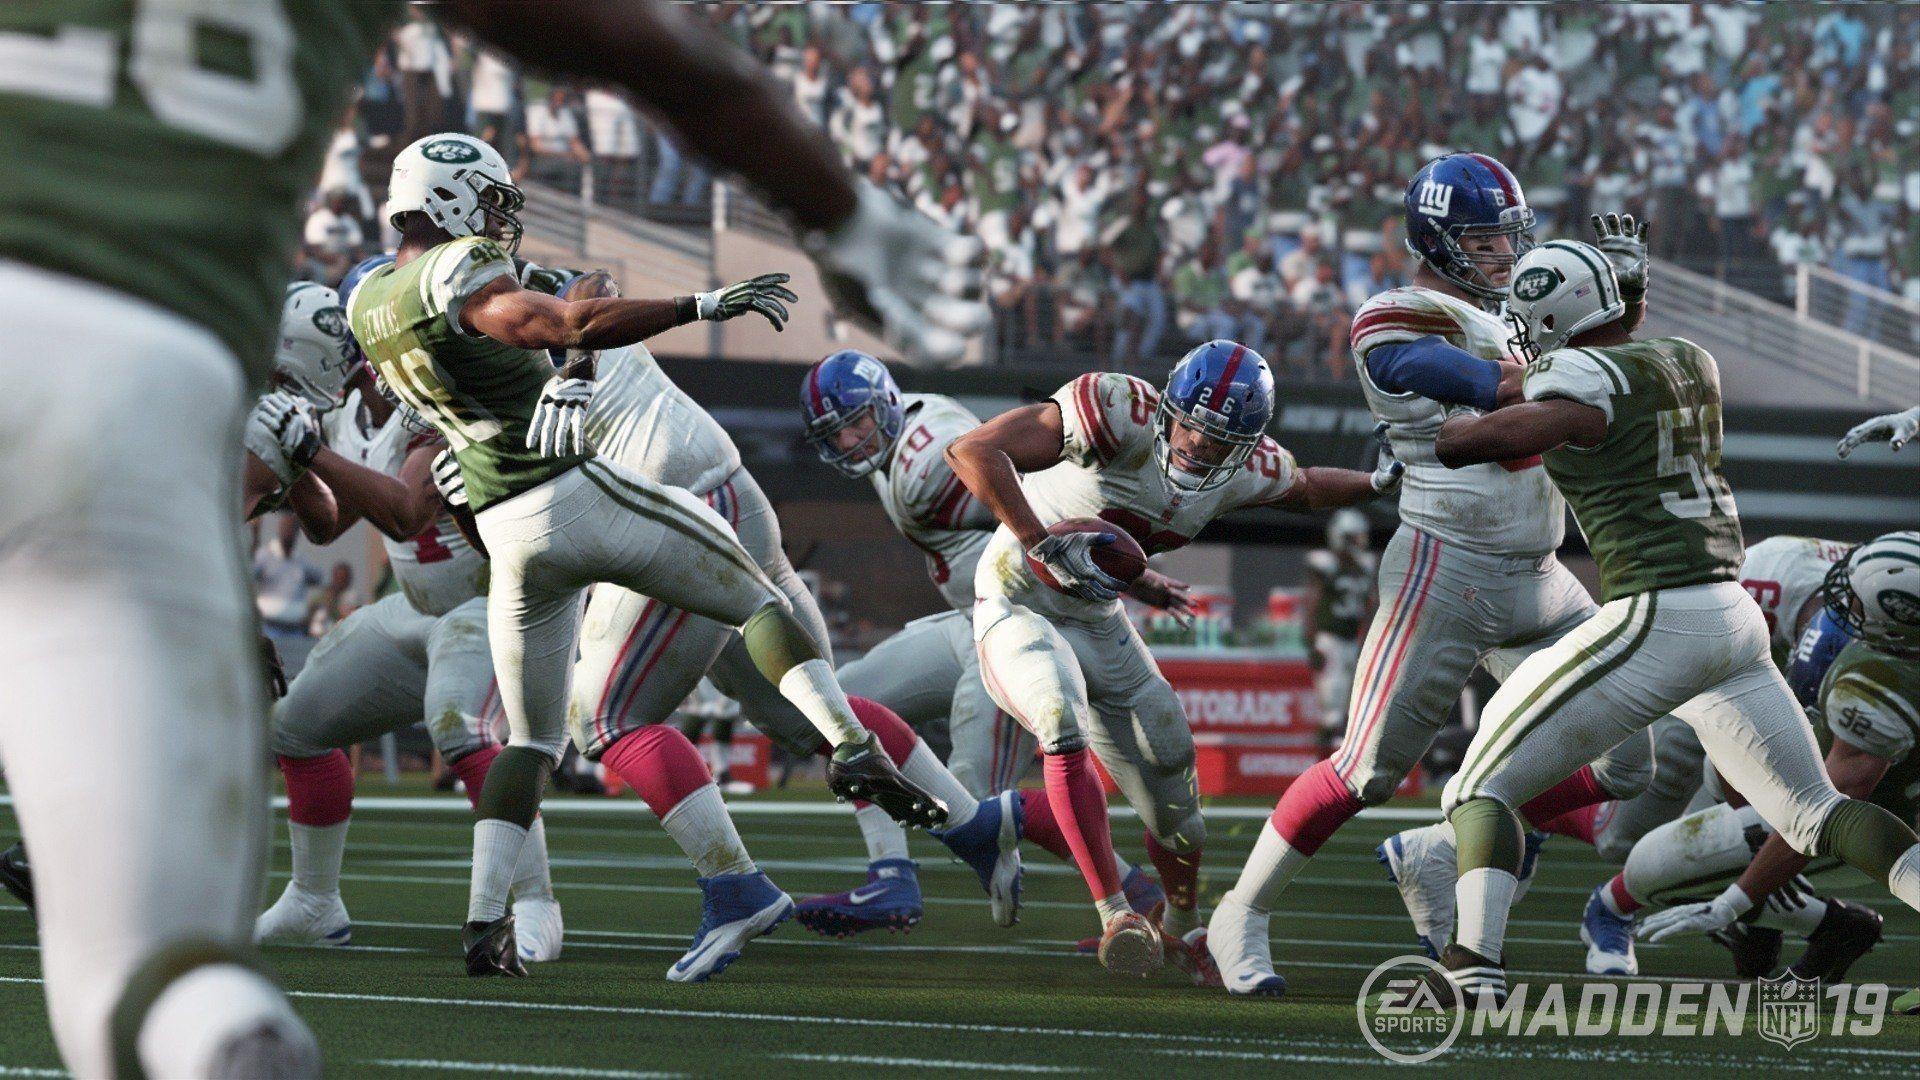 Madden Screenshots, Pictures, Wallpapers